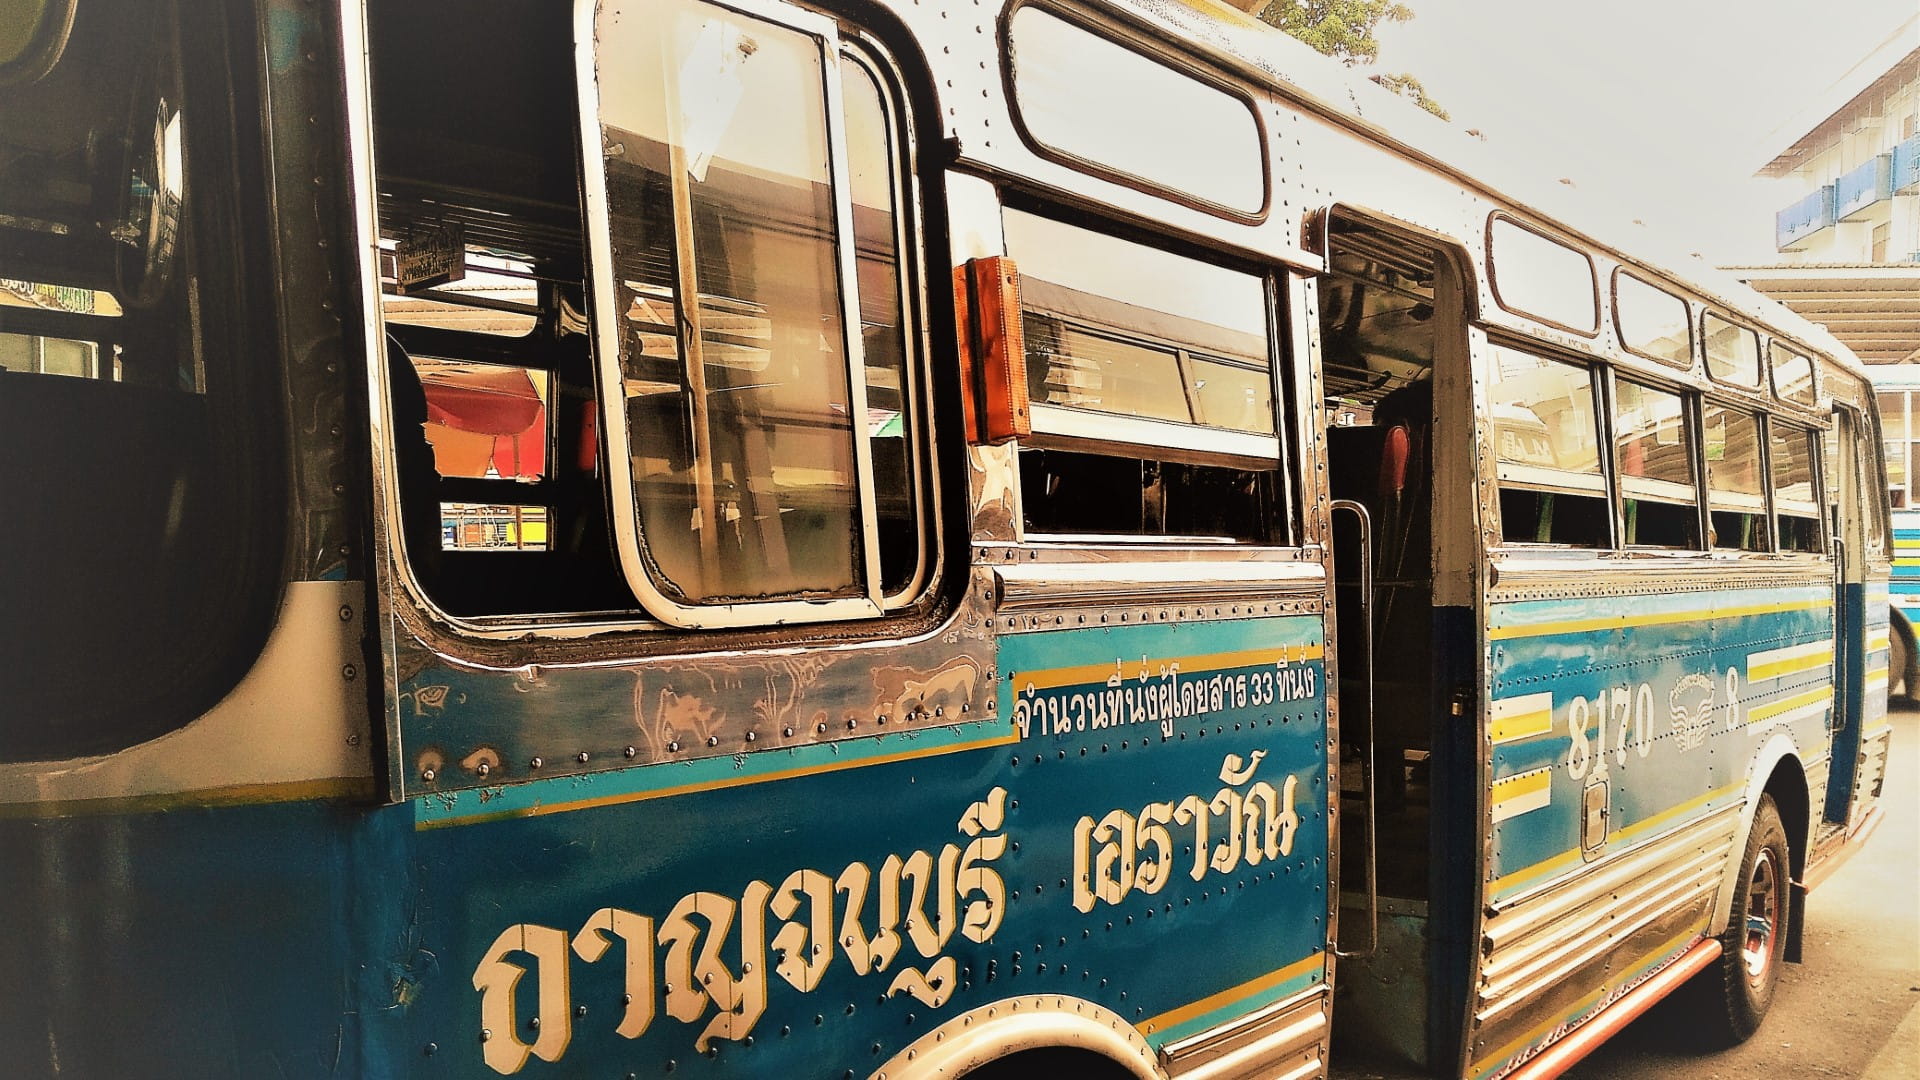 Bus, minibuses and bus stations in Thailand